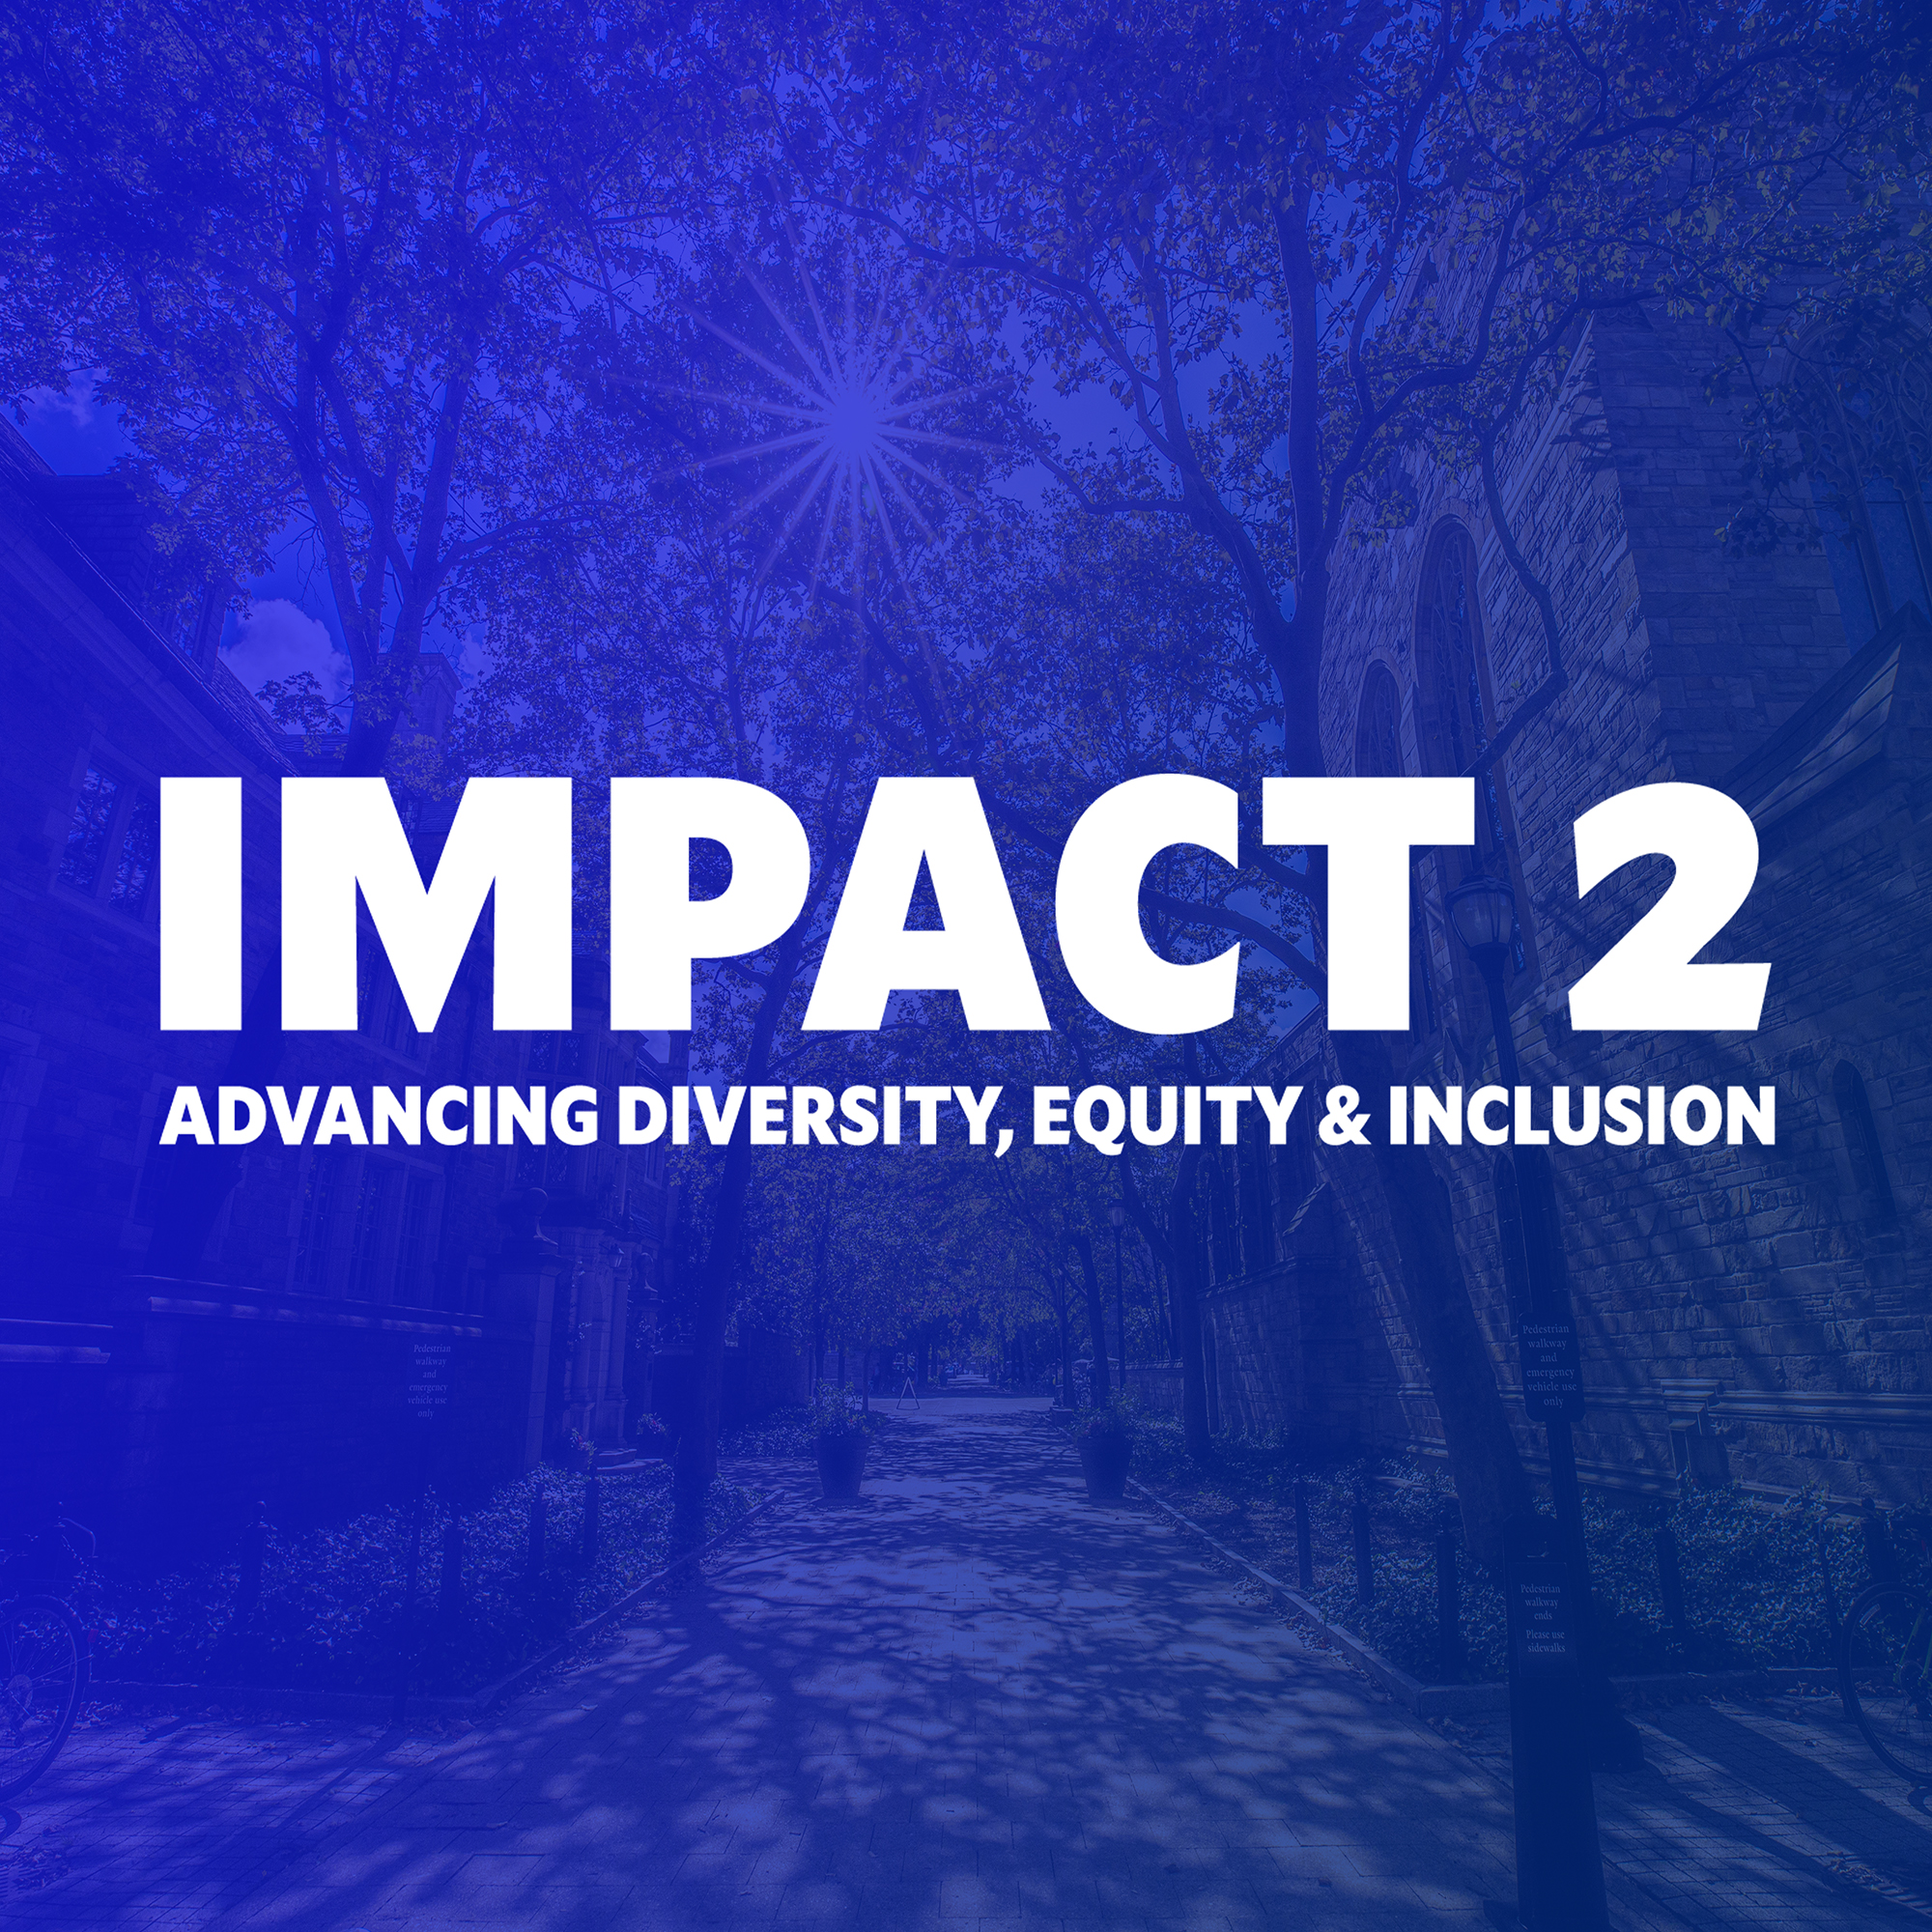 The IMPACT 2 Series on advancing diversity, equity, and inclusion through social change launches March 15.